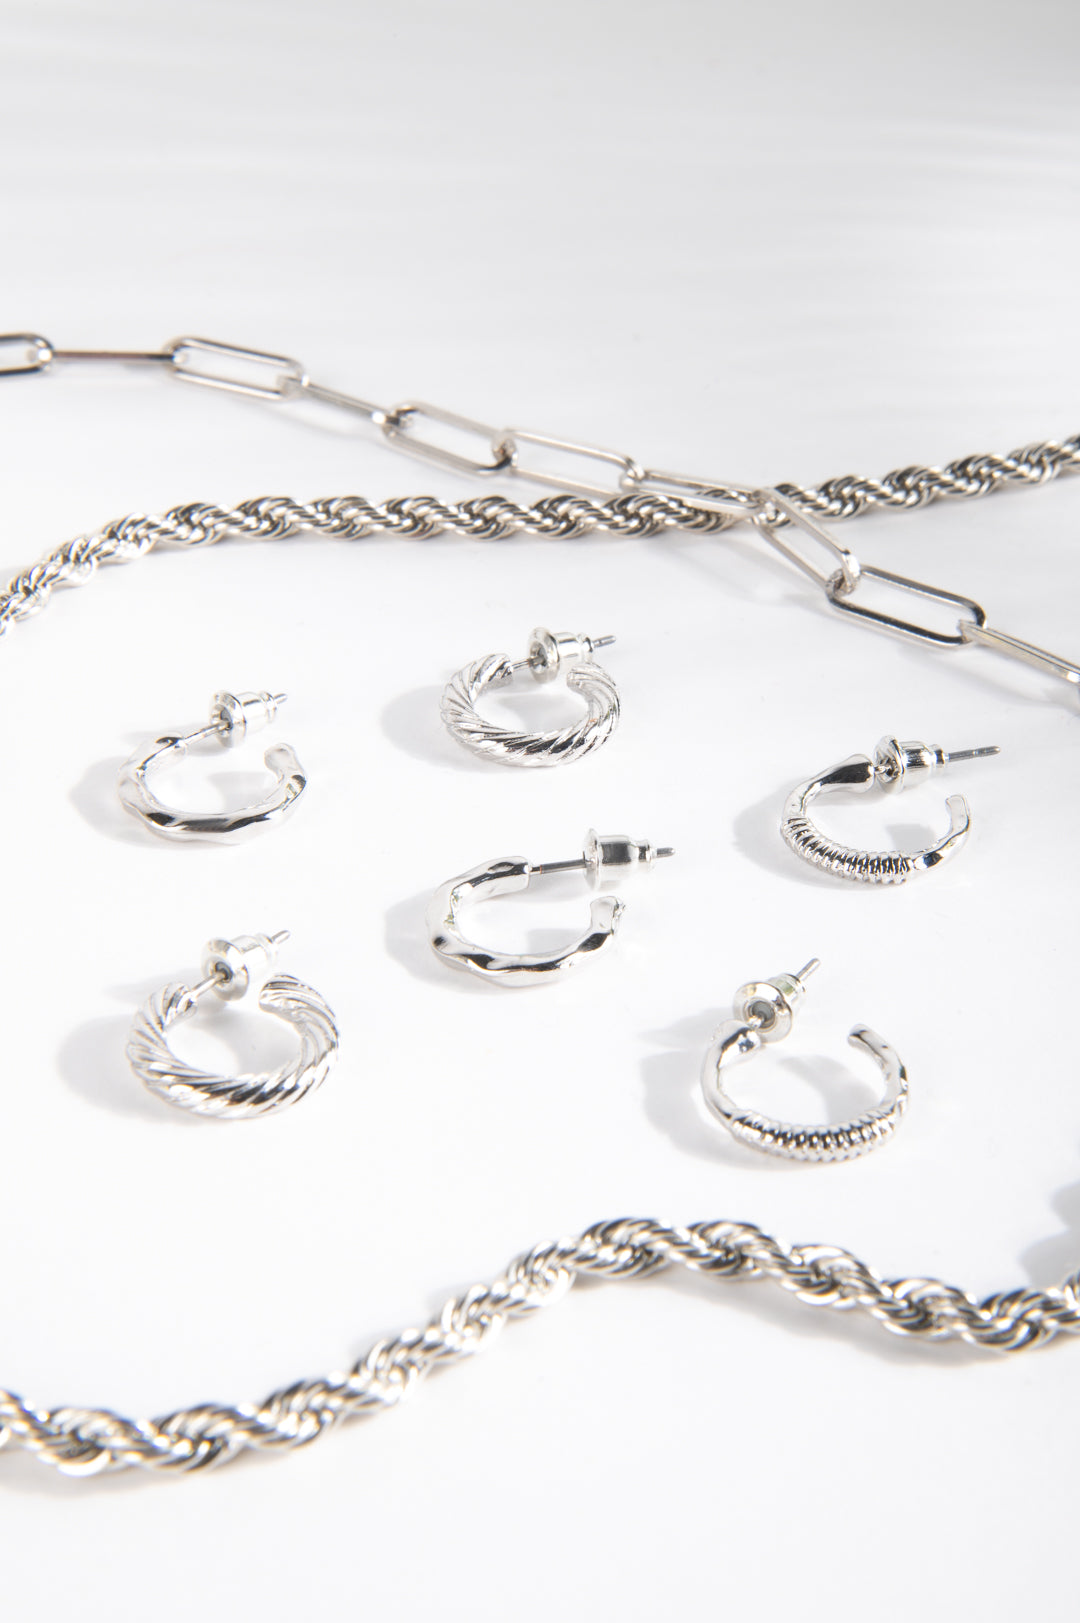 Ohrring Set in Silber